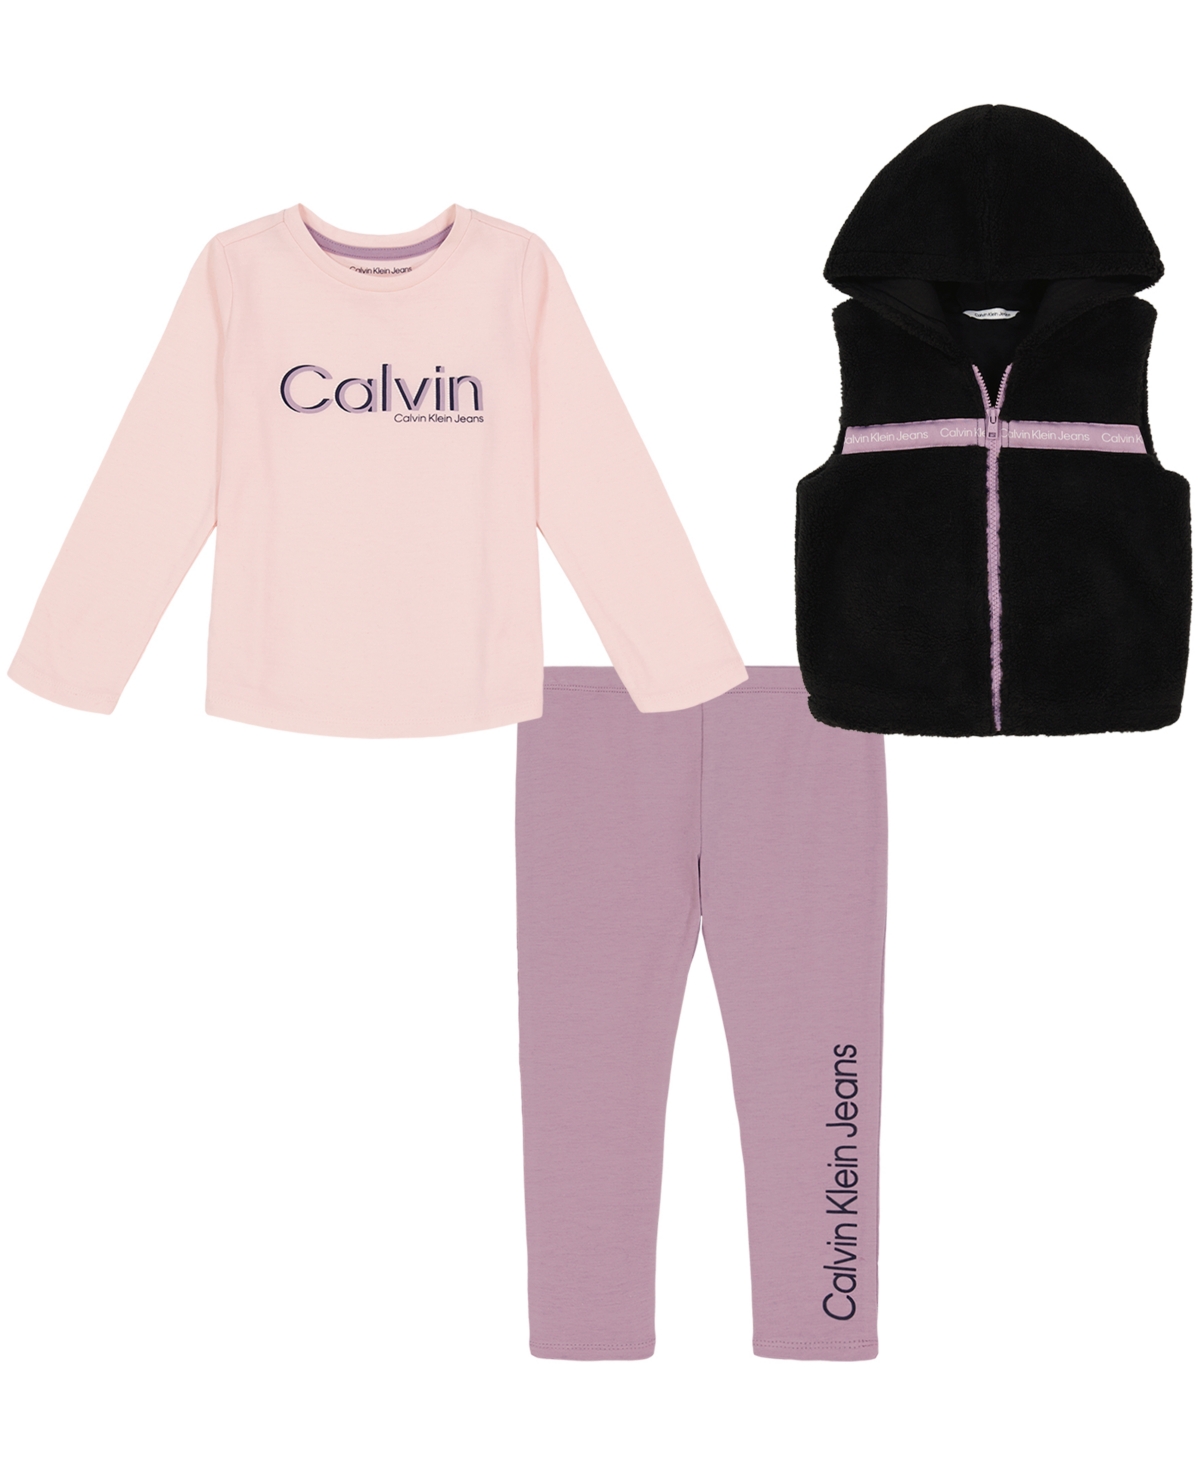 Calvin Klein Babies' Toddler Girls Hooded Sherpa Vest With Logo T-shirt And Leggings, 3 Piece Set In Black